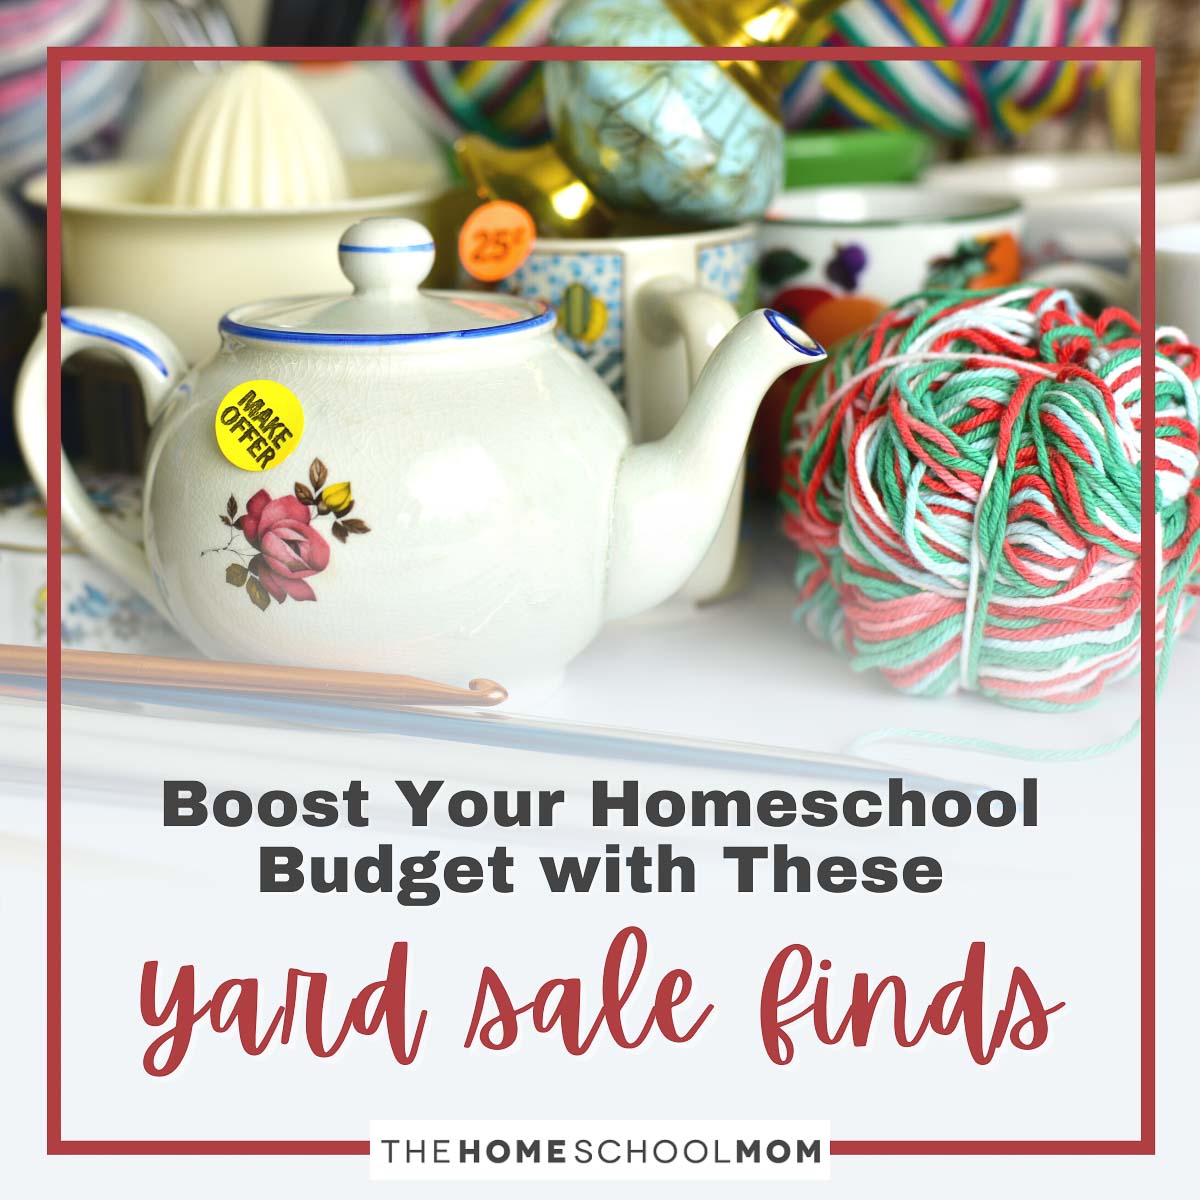 Boost Your Homeschool Budget With These Yard Sale Finds